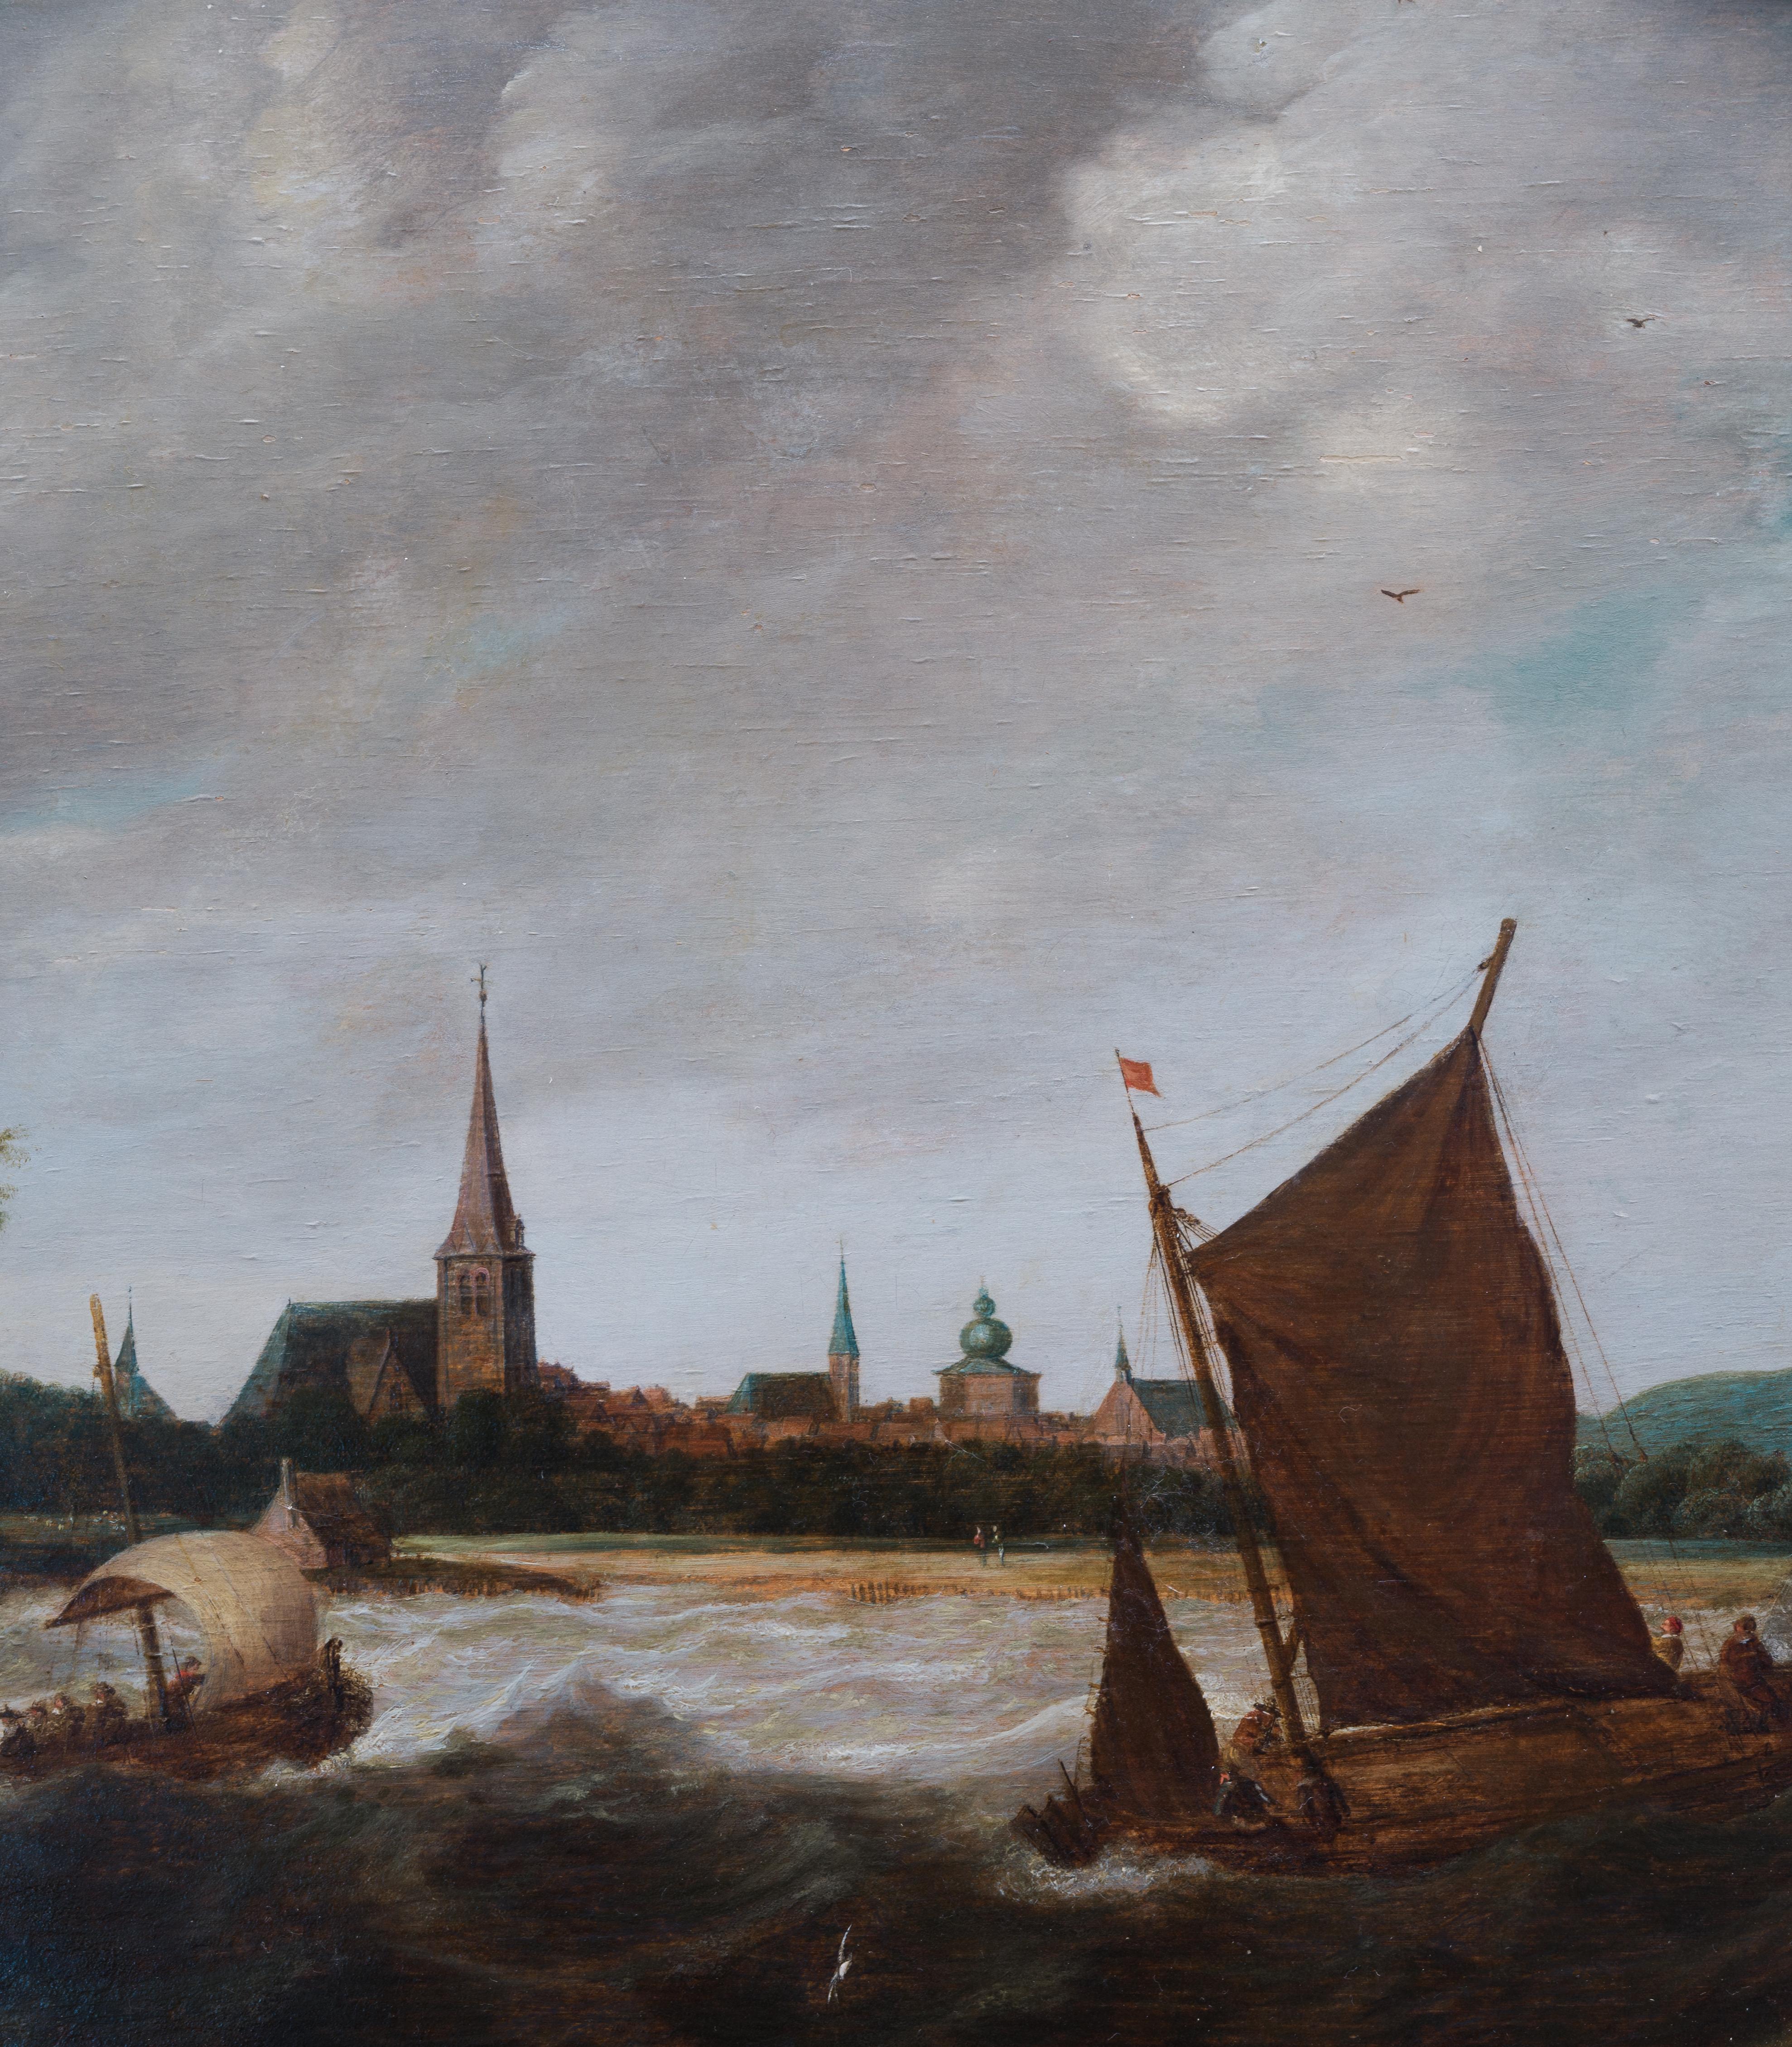 We are delighted to present a significant piece from the Dutch School, most likely dating back to the late 17th century. This captivating painting showcases the dynamic force of nature with three ships vigorously navigating through stormy waters.